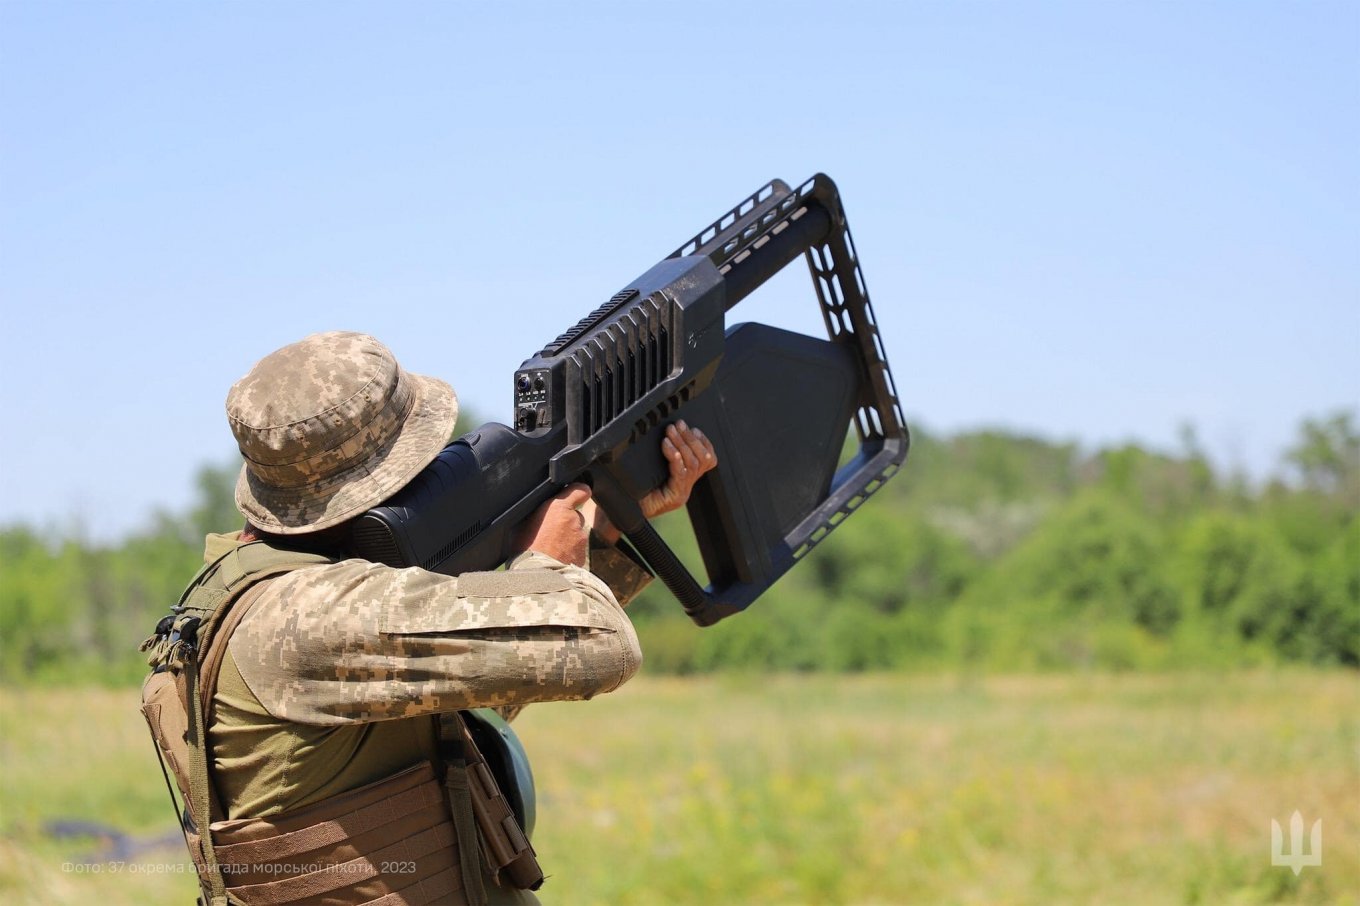 Ukrainian soldiers apply various futuristic-looking anti-drone weapons to deprive enemy drones of guidance, force them to stray from programmed route or completely take over the control